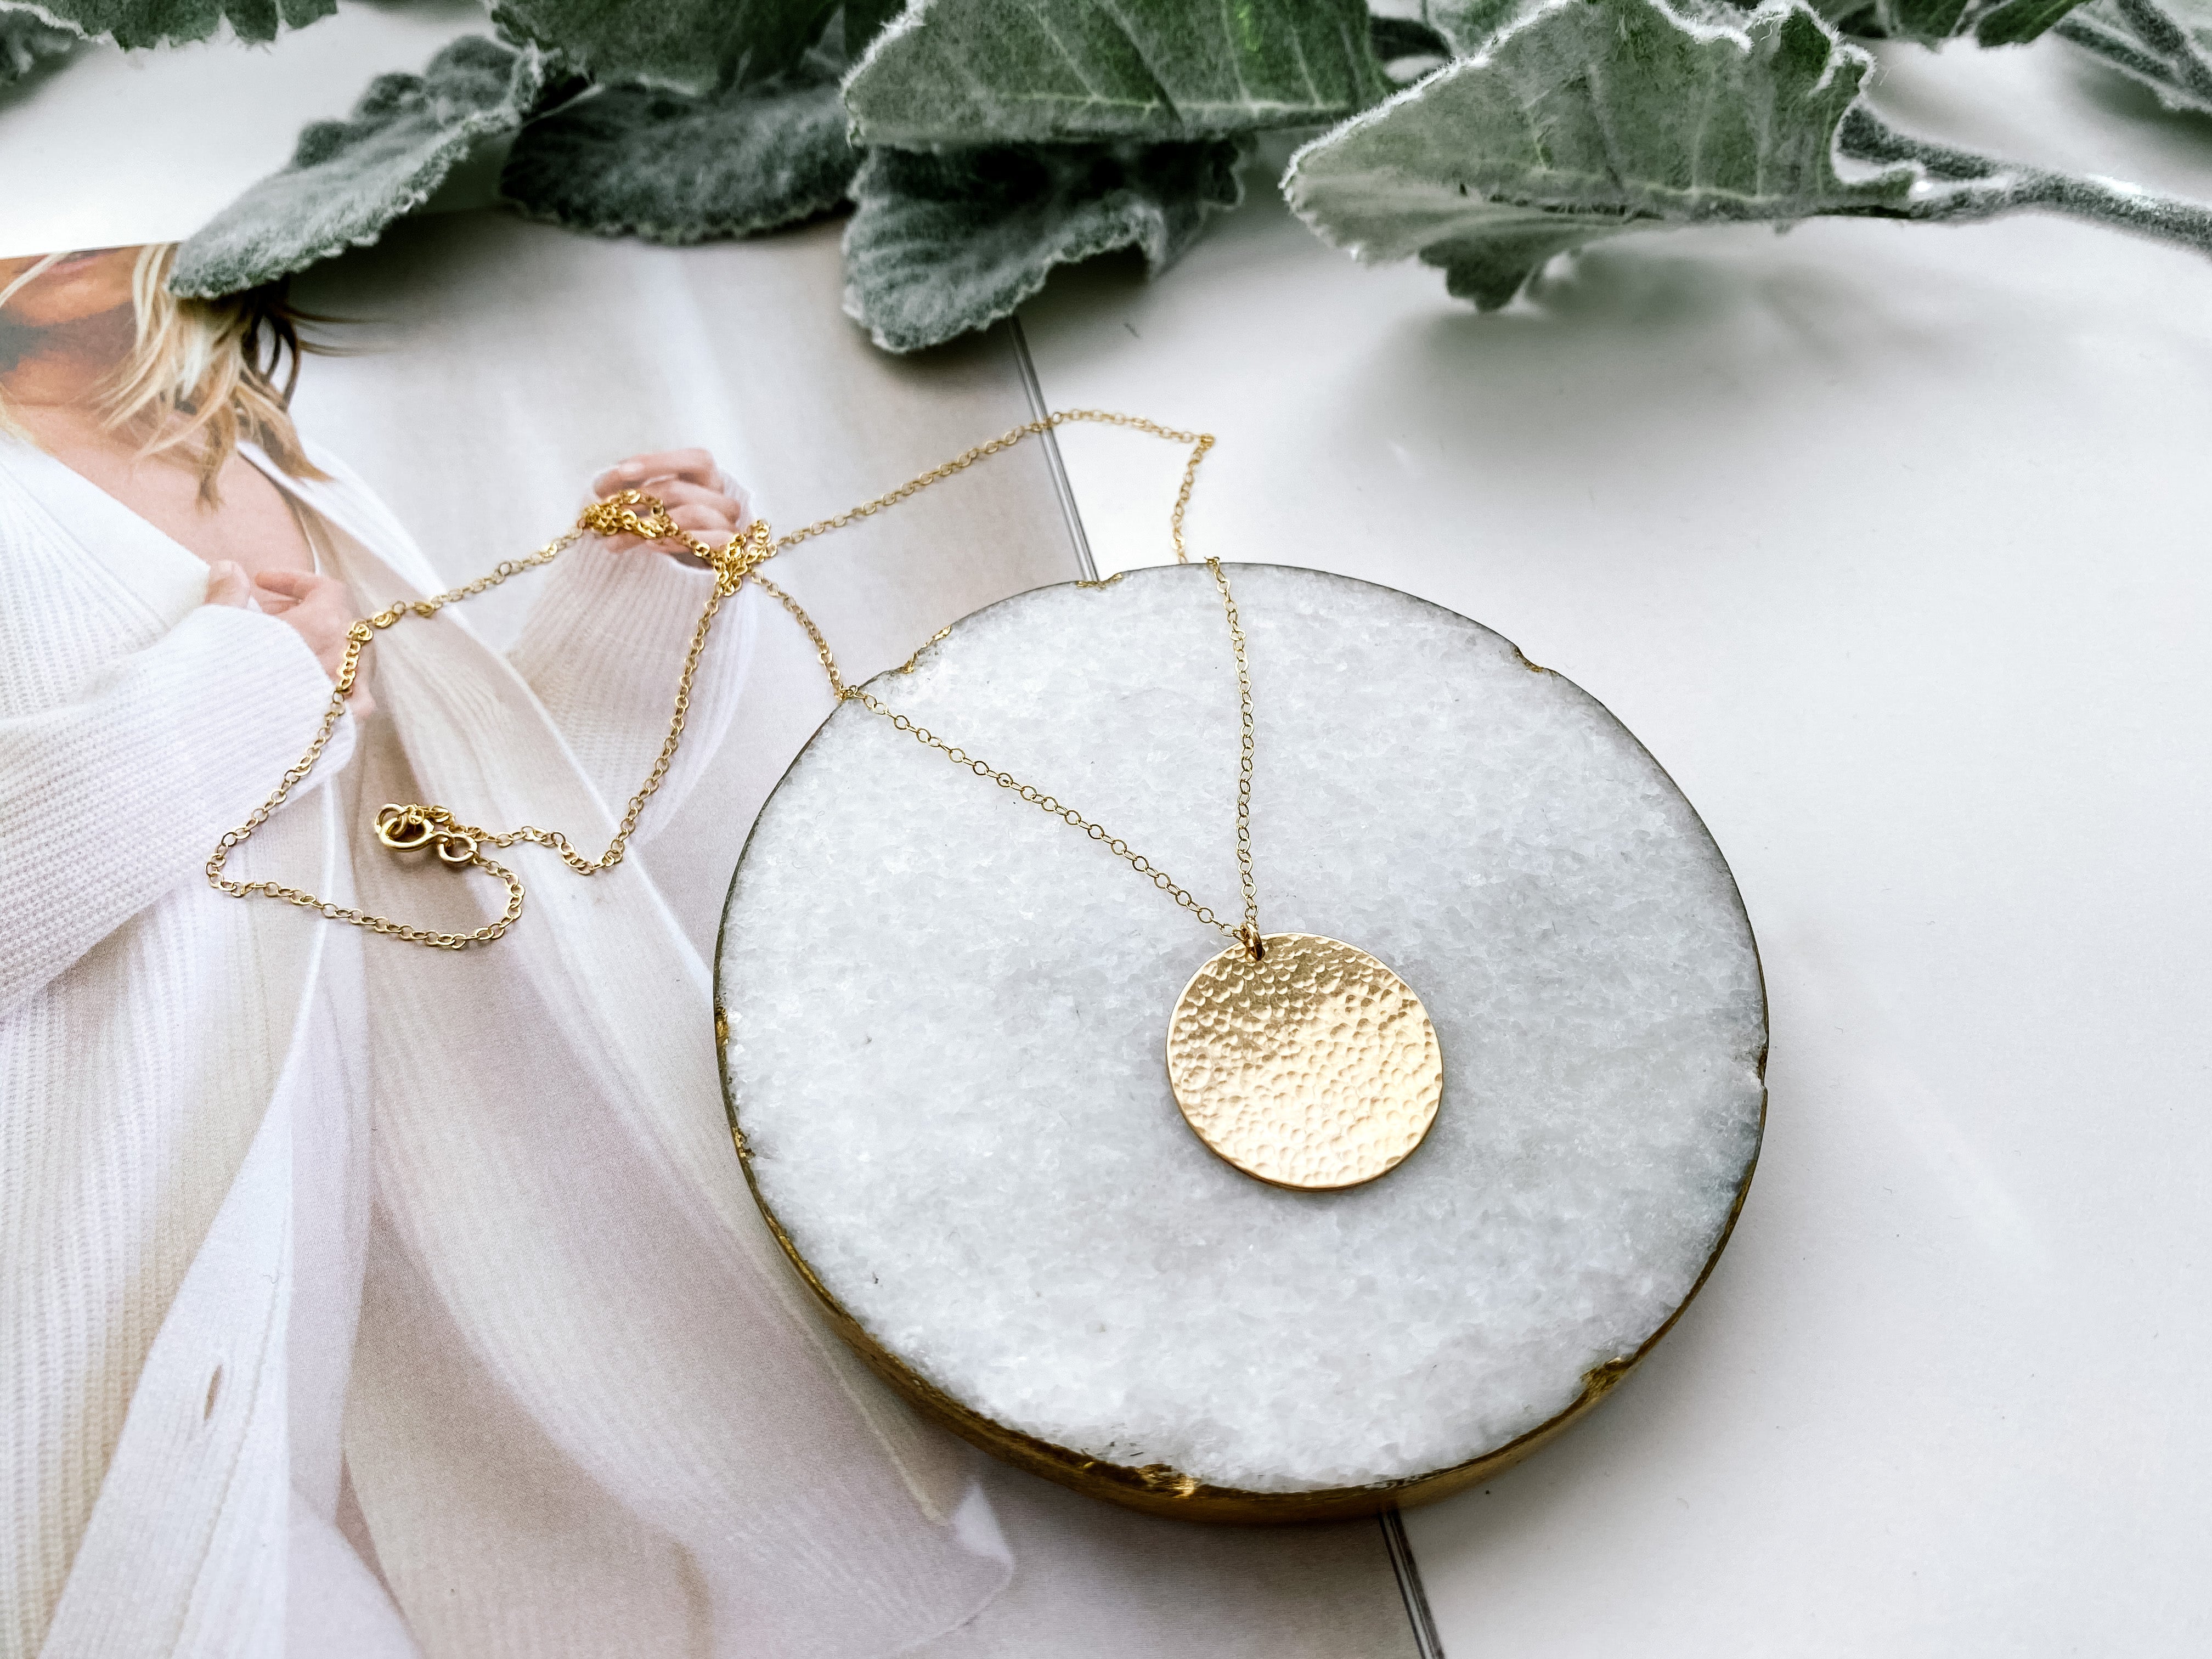 NB x PS46 Hammered Coin Necklace